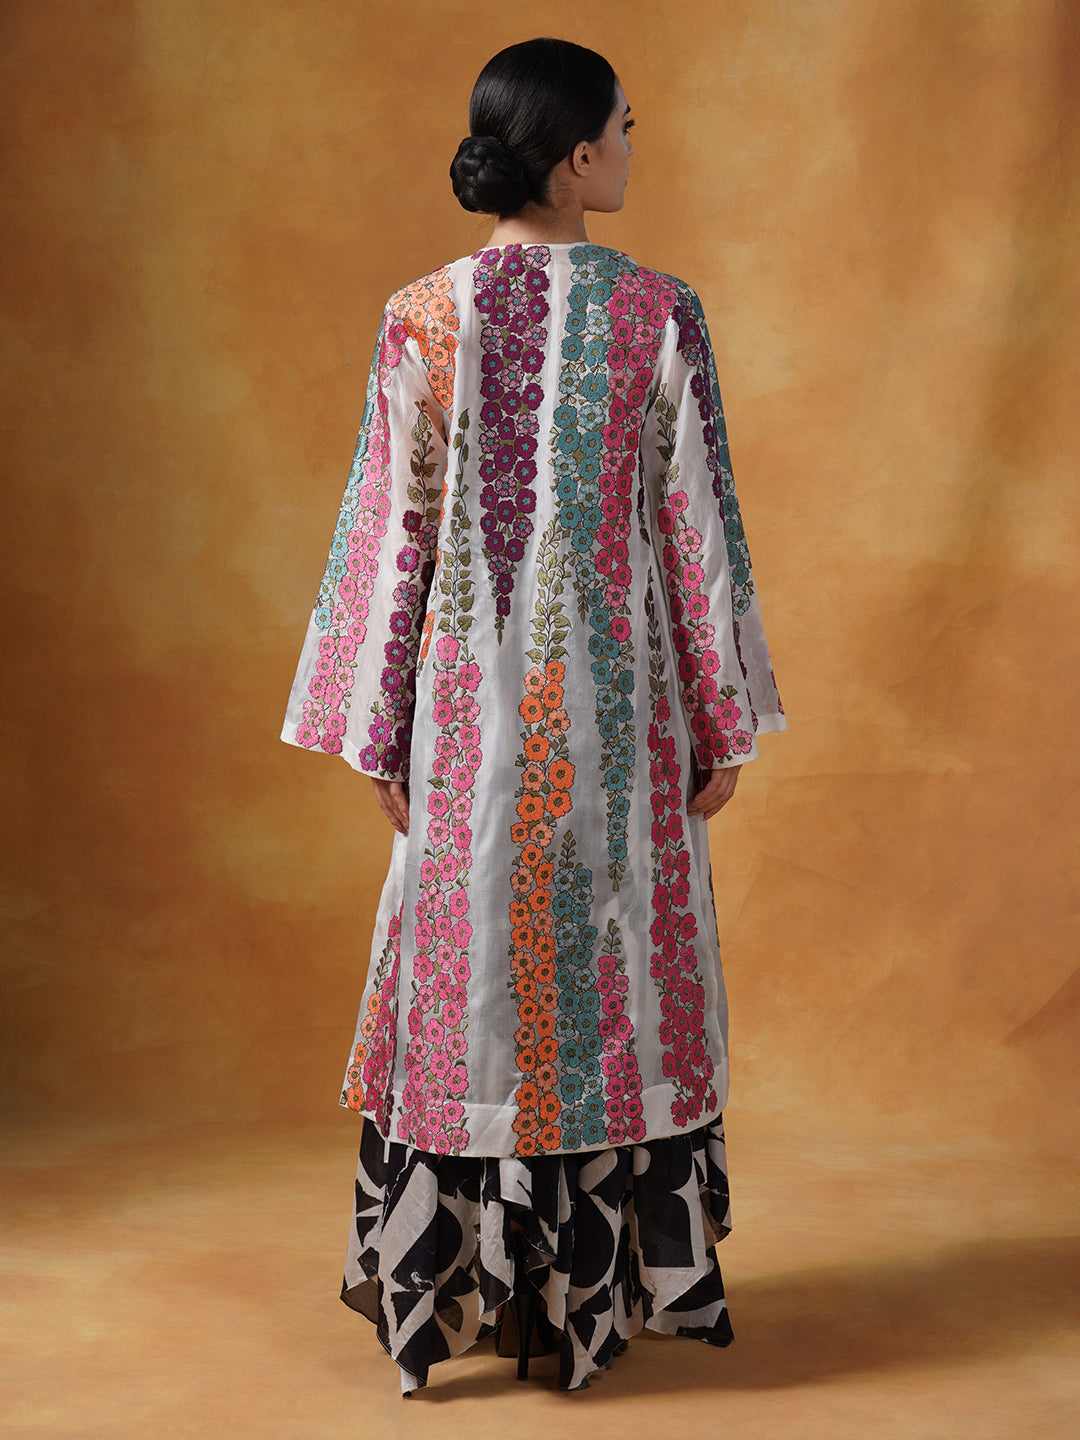 organza jacket adorned in beautiful silk thread floral embroidery over a white embellished tube to and printed skirt